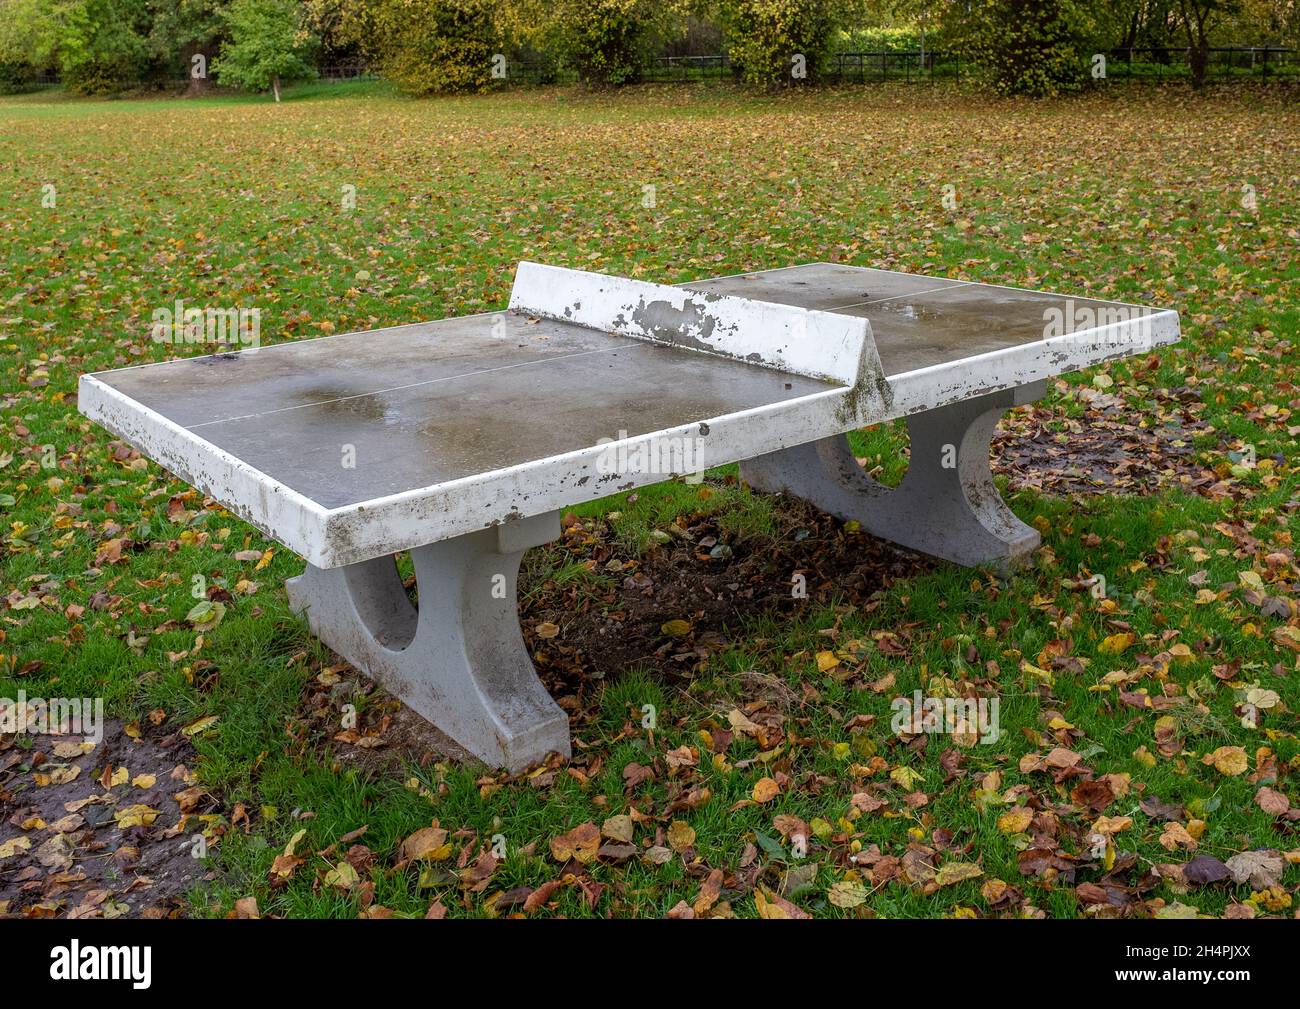 Concrete public table tennis or ping pong table in a green field with autumn colours. Stock Photo